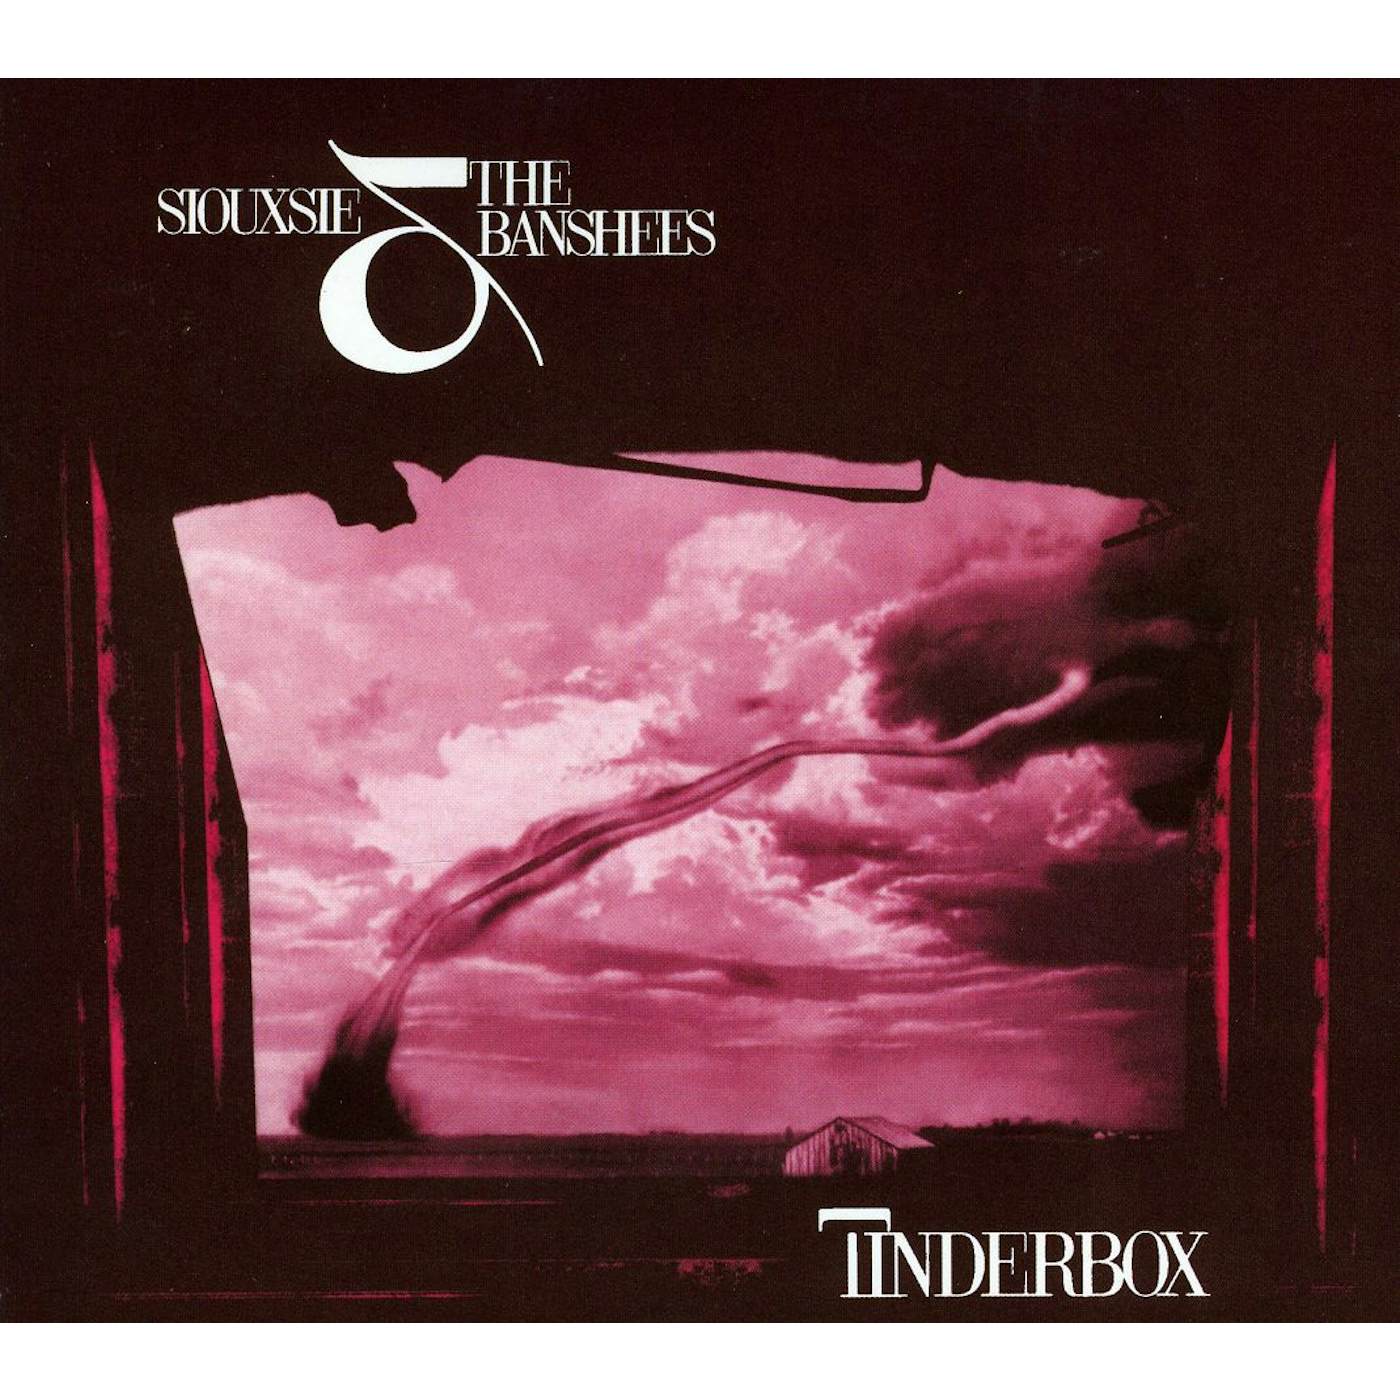 Siouxsie and the Banshees TINDERBOX CD